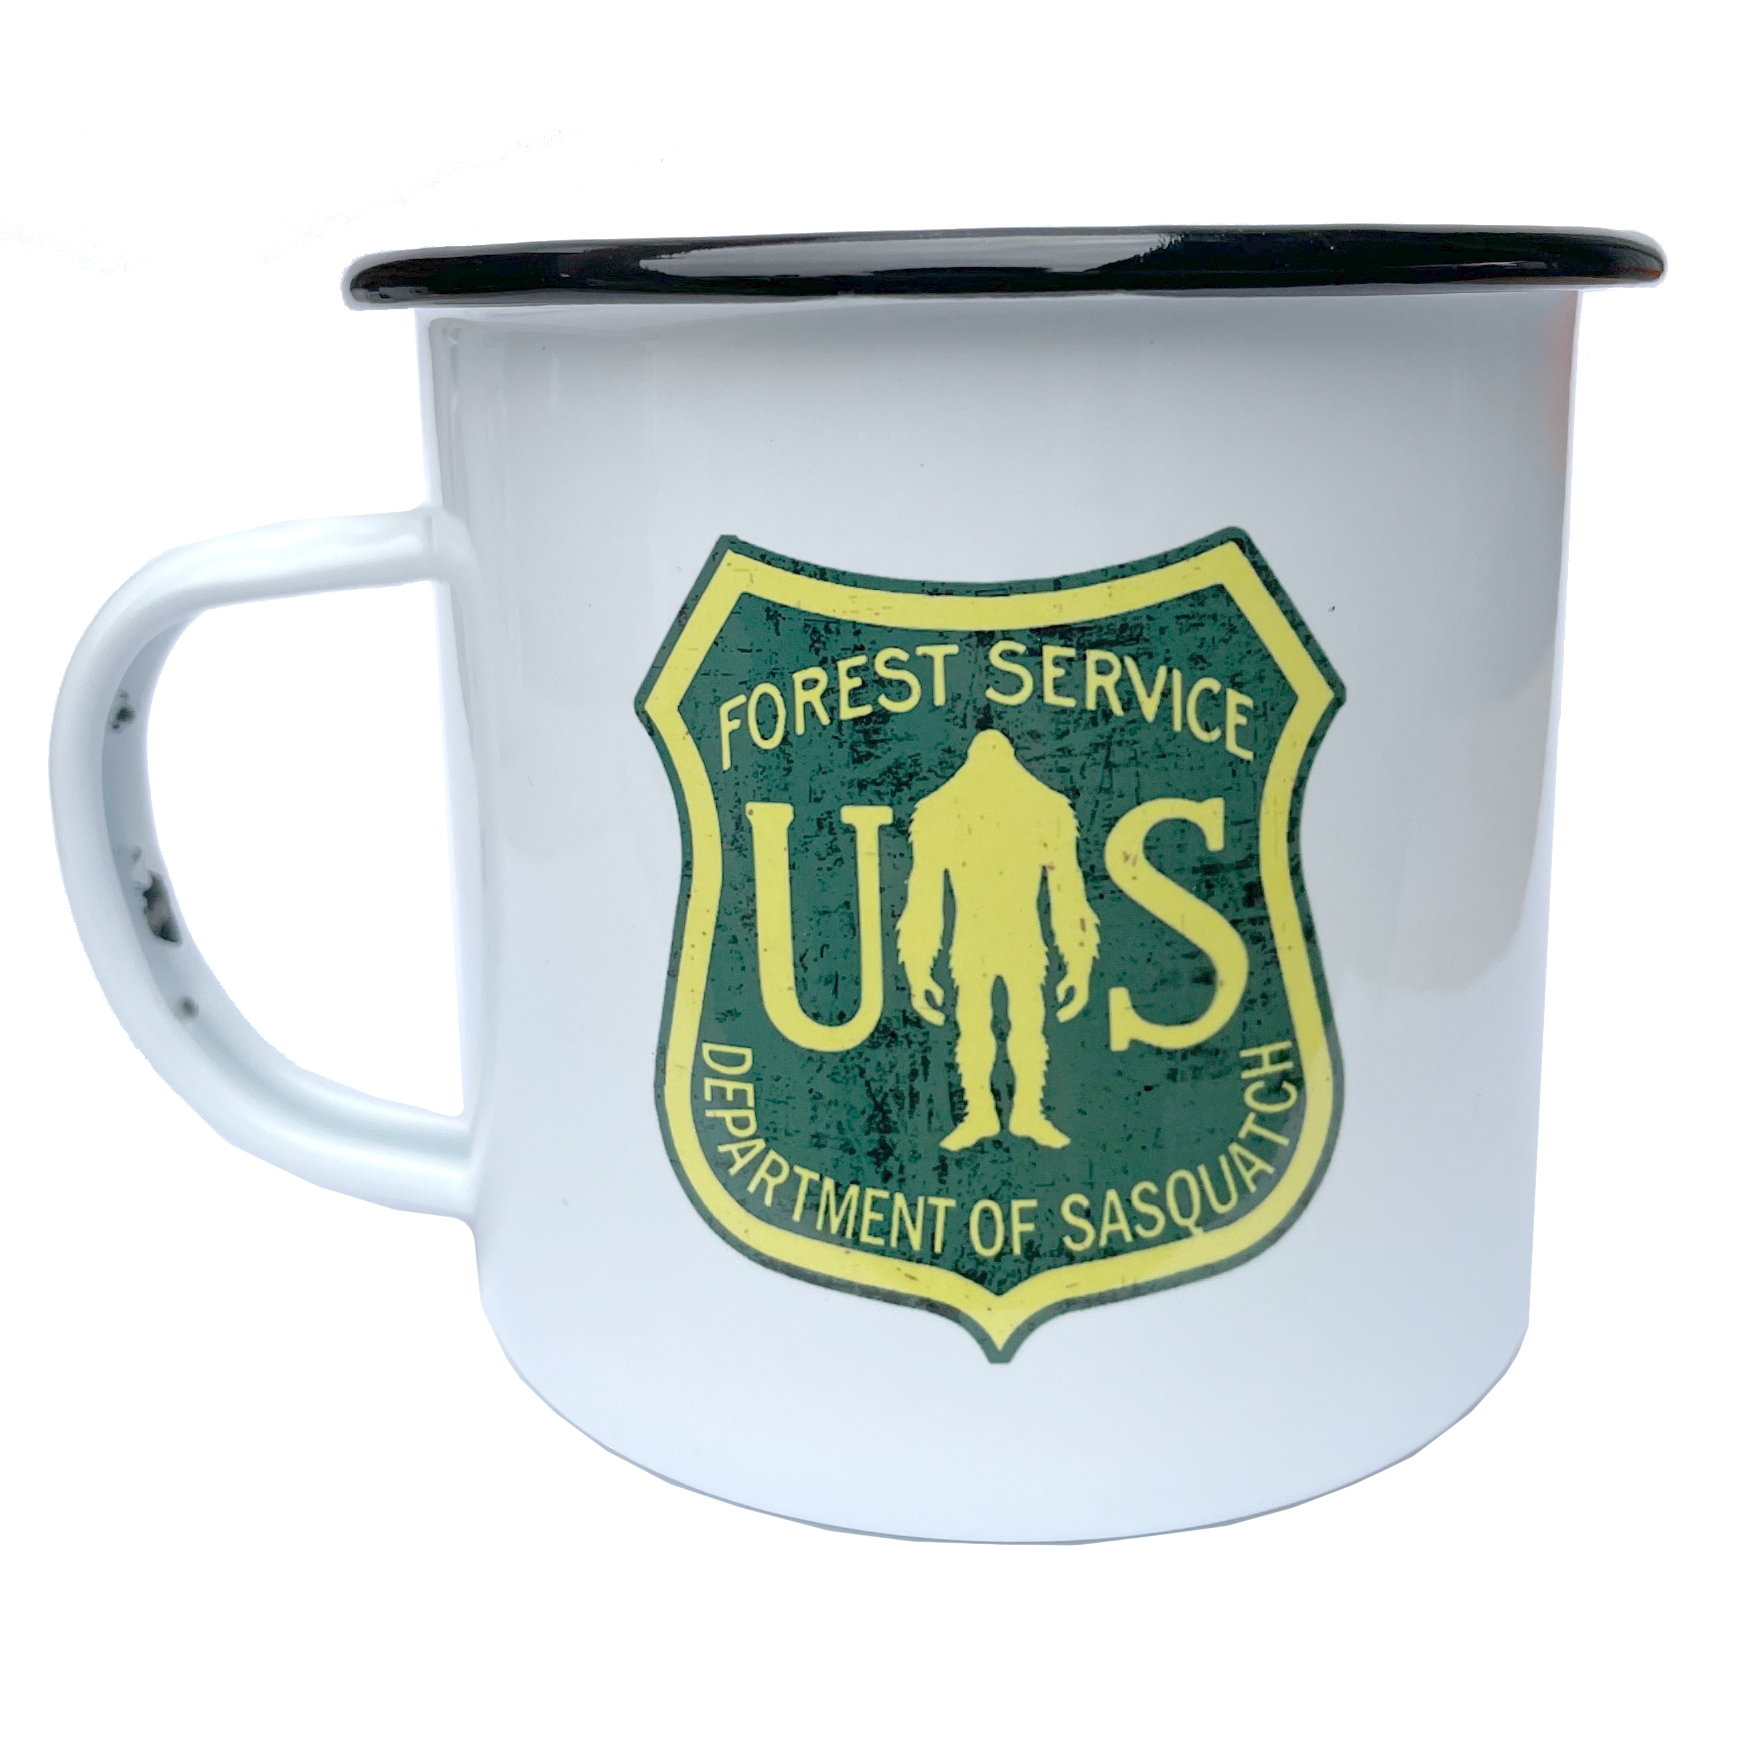 https://www.paracay.com/images/thumbnails/1764/1764/detailed/44/coffee_mug_usfs_dept.png